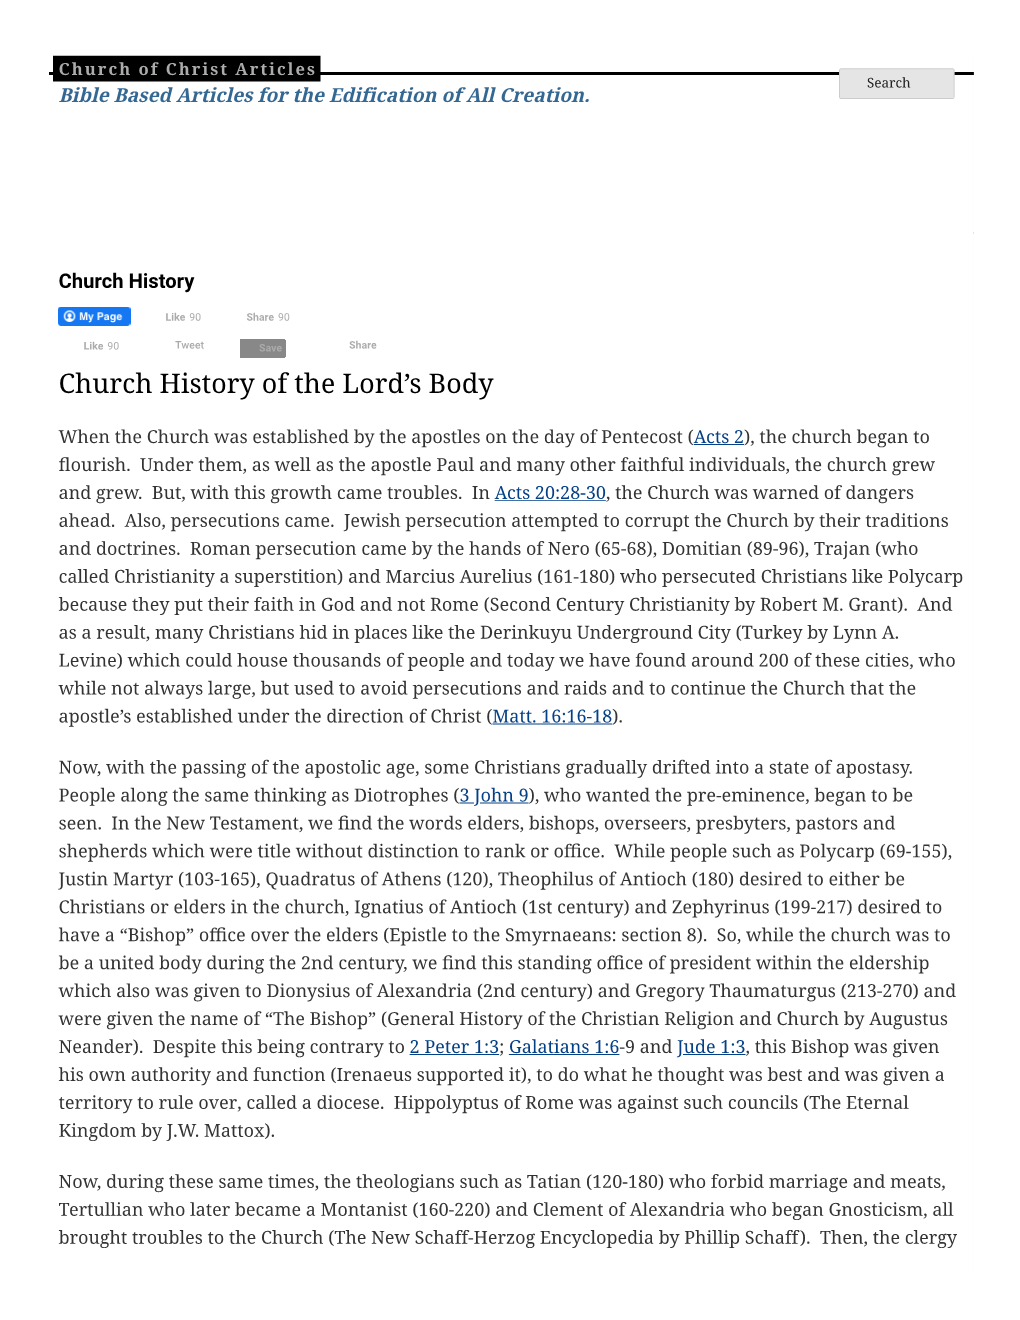 Church History of the Lord's Body